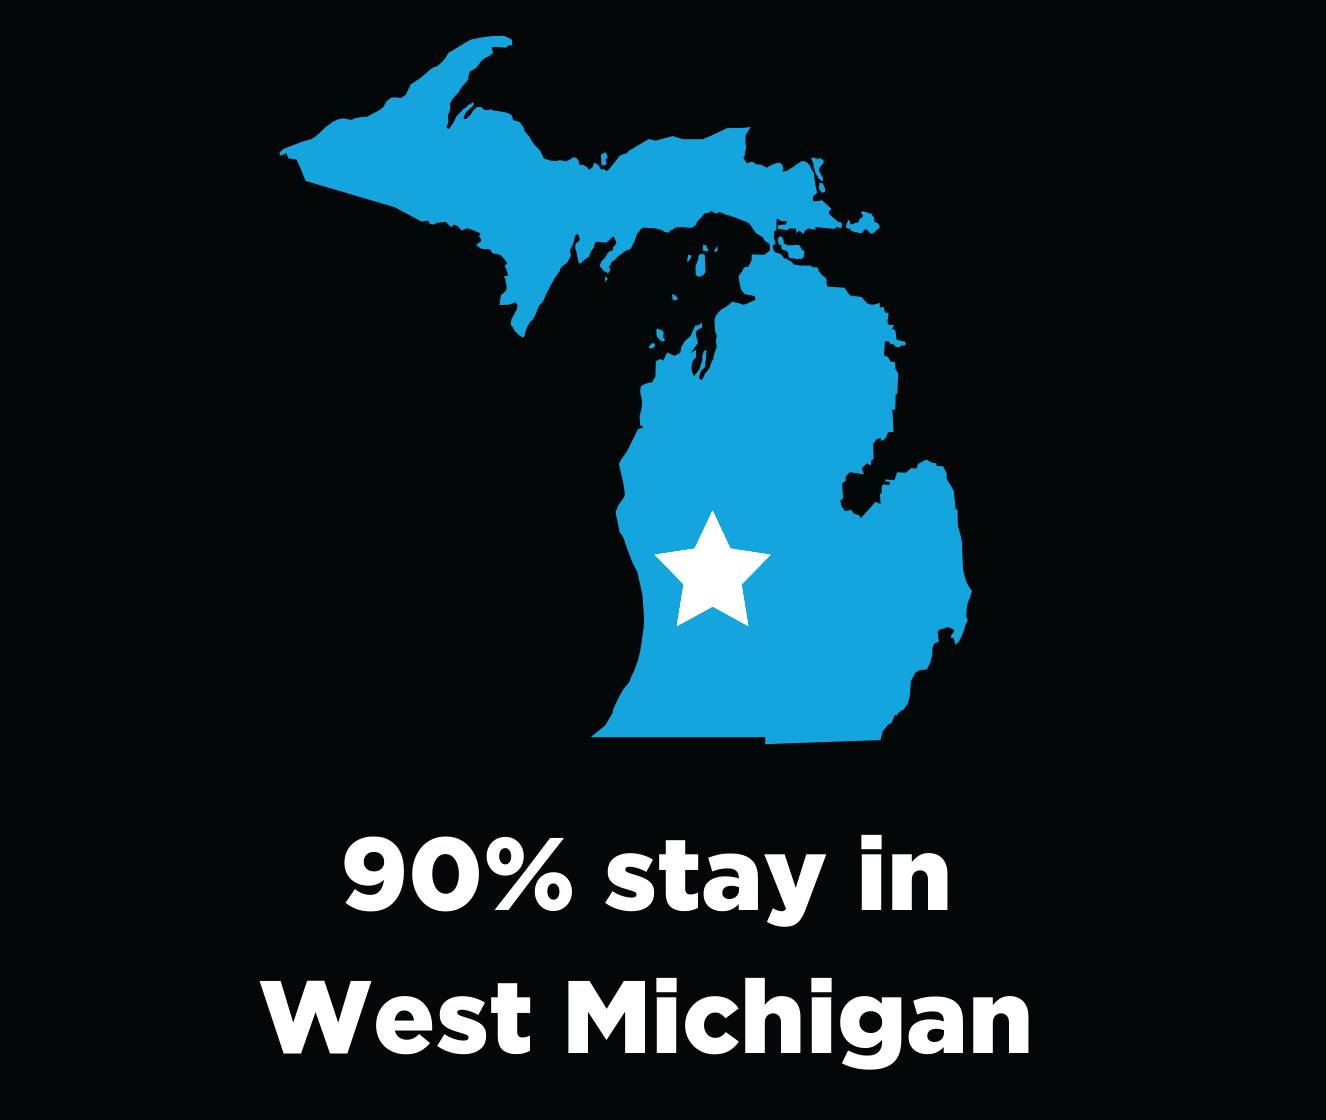 90% stay in West Michigan